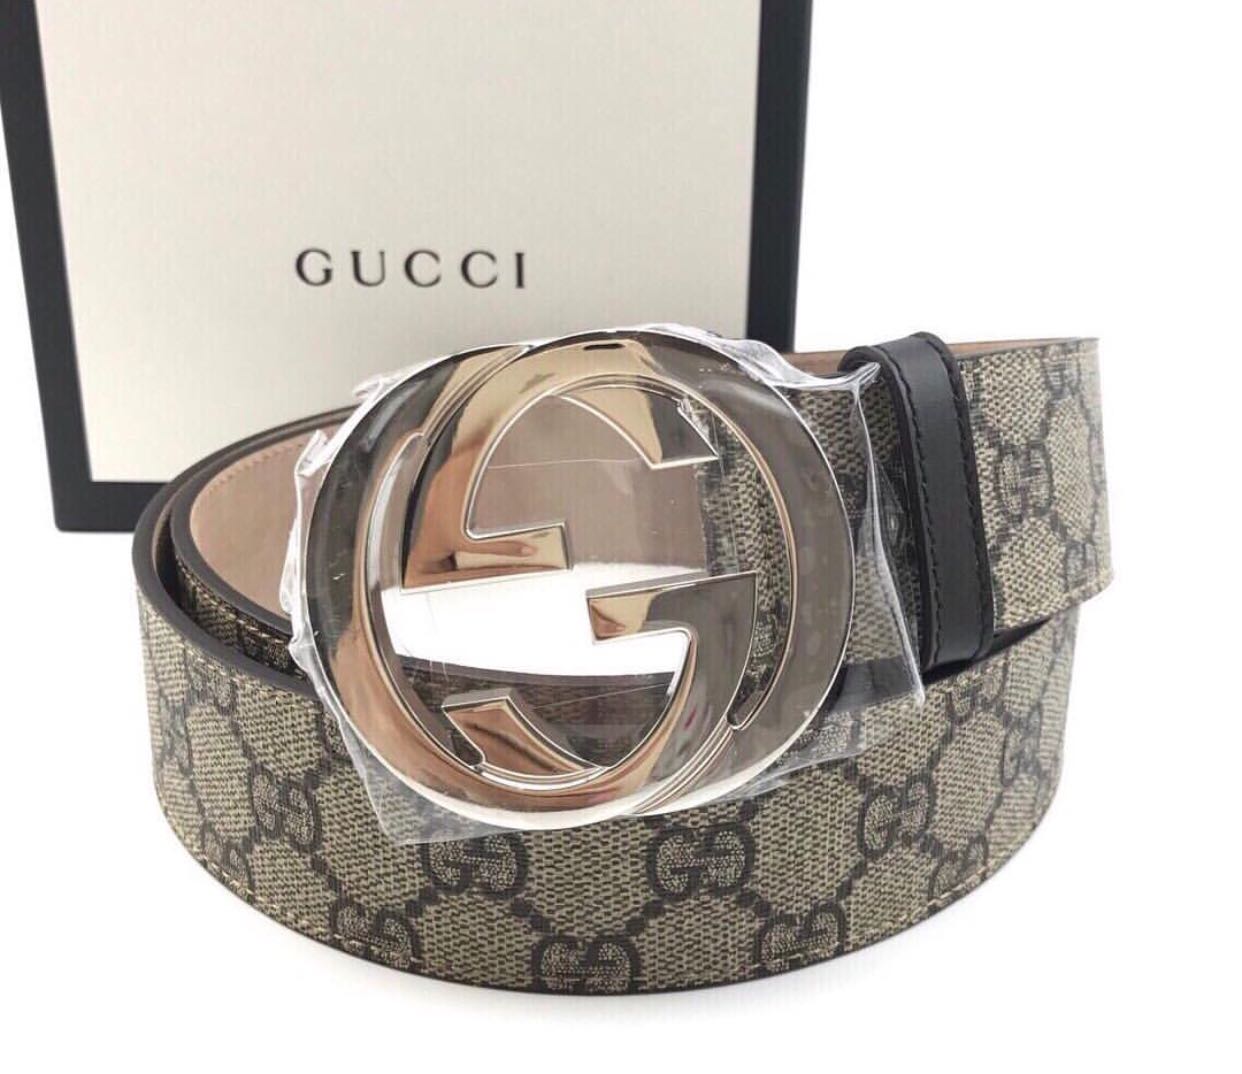 Gucci belt [SALE], Luxury, Accessories, Belts on Carousell